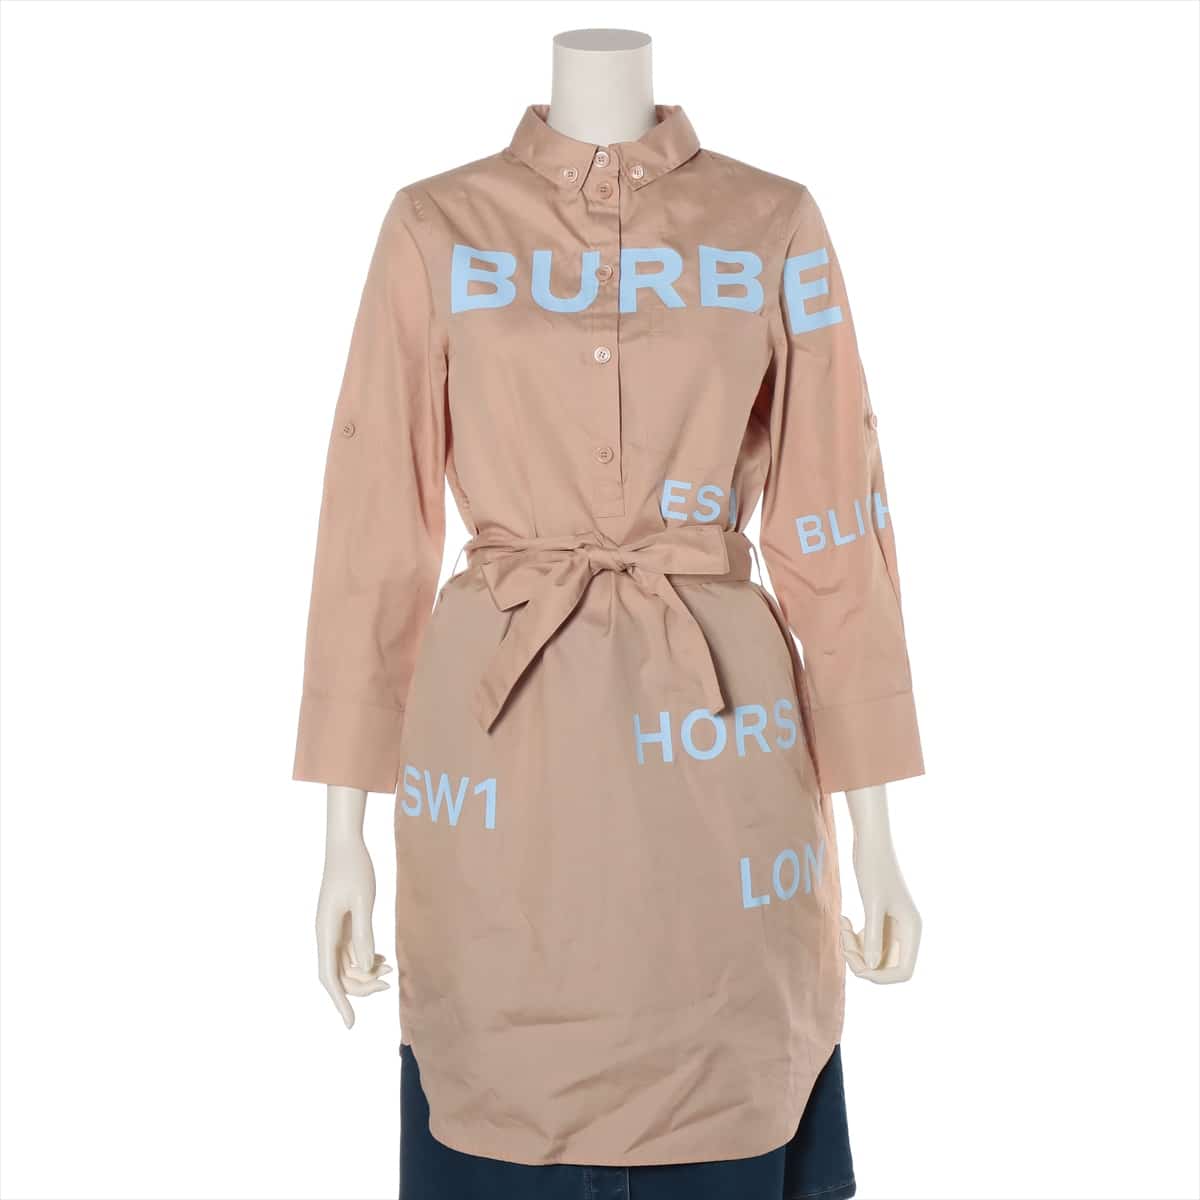 Burberry Horse ferry Tissi period Cotton Shirt dress 34 Ladies' Beige  belted